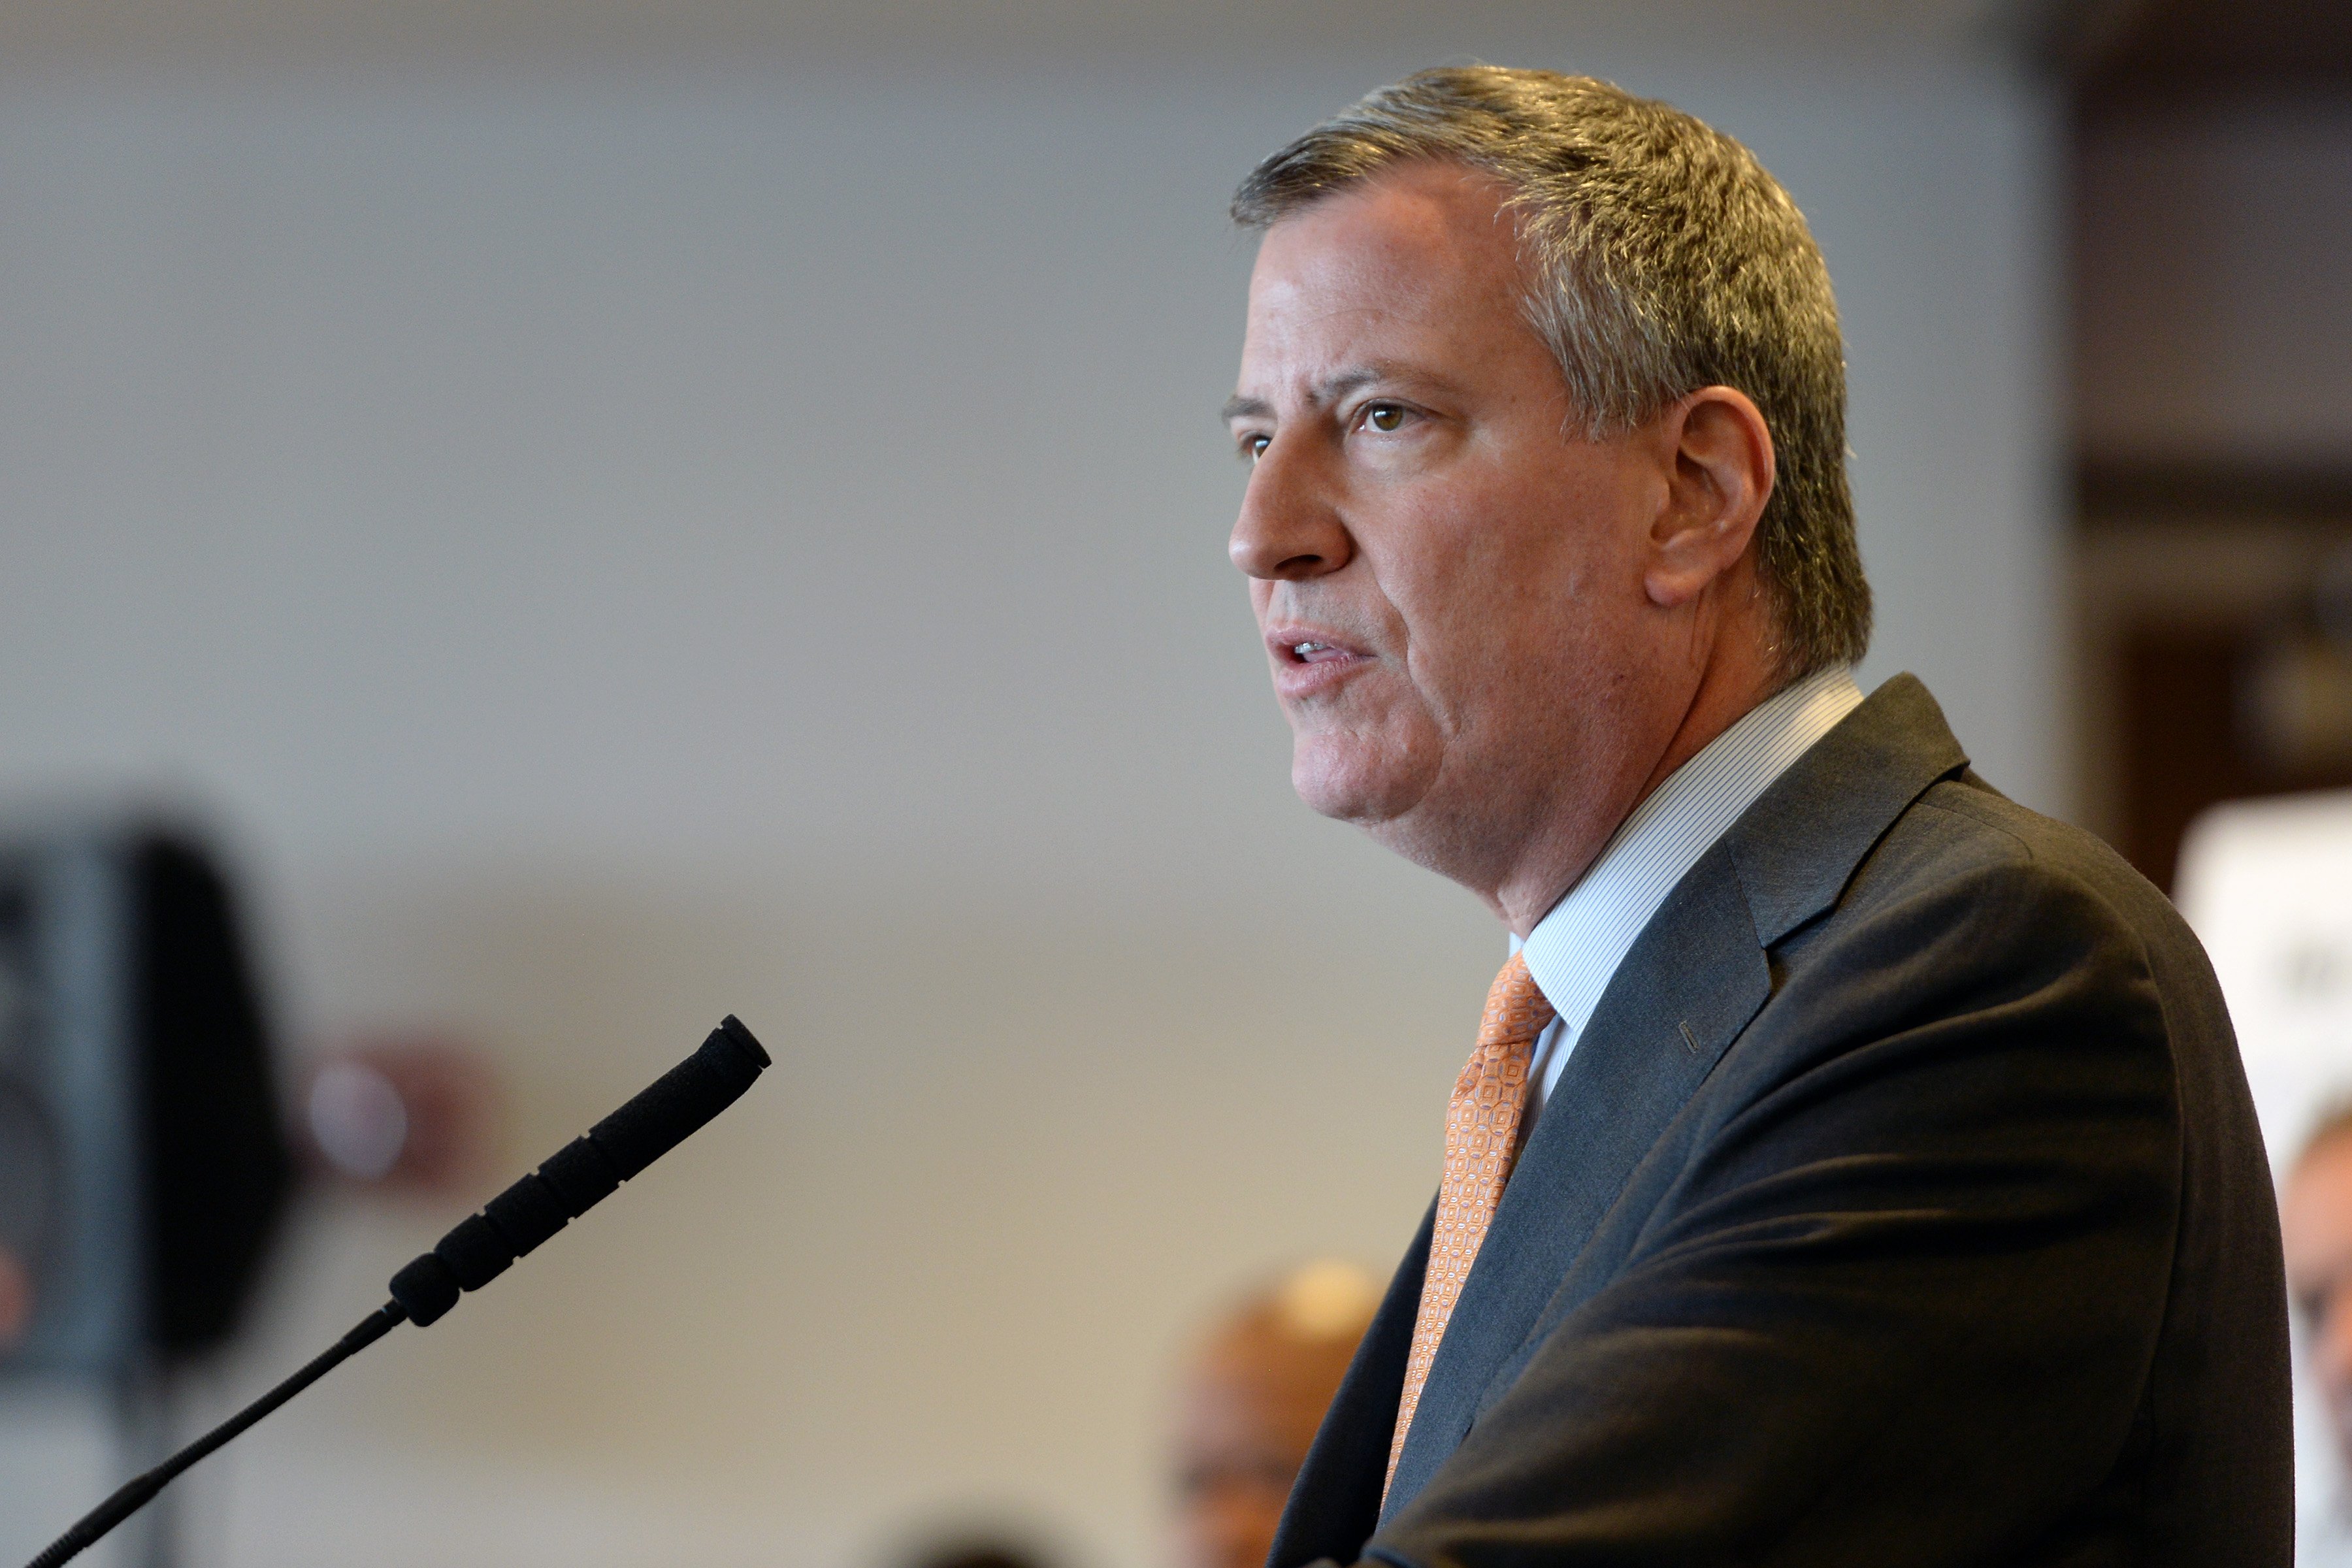 New York City Mayor Bill de Blasio holds a press conference to speak about new guidelines for NYPD officer retraining at the New York Police Academy in the Flushing section of Queens, New York, on Dec. 4, 2014. (Anthony Beha—SIPA USA)